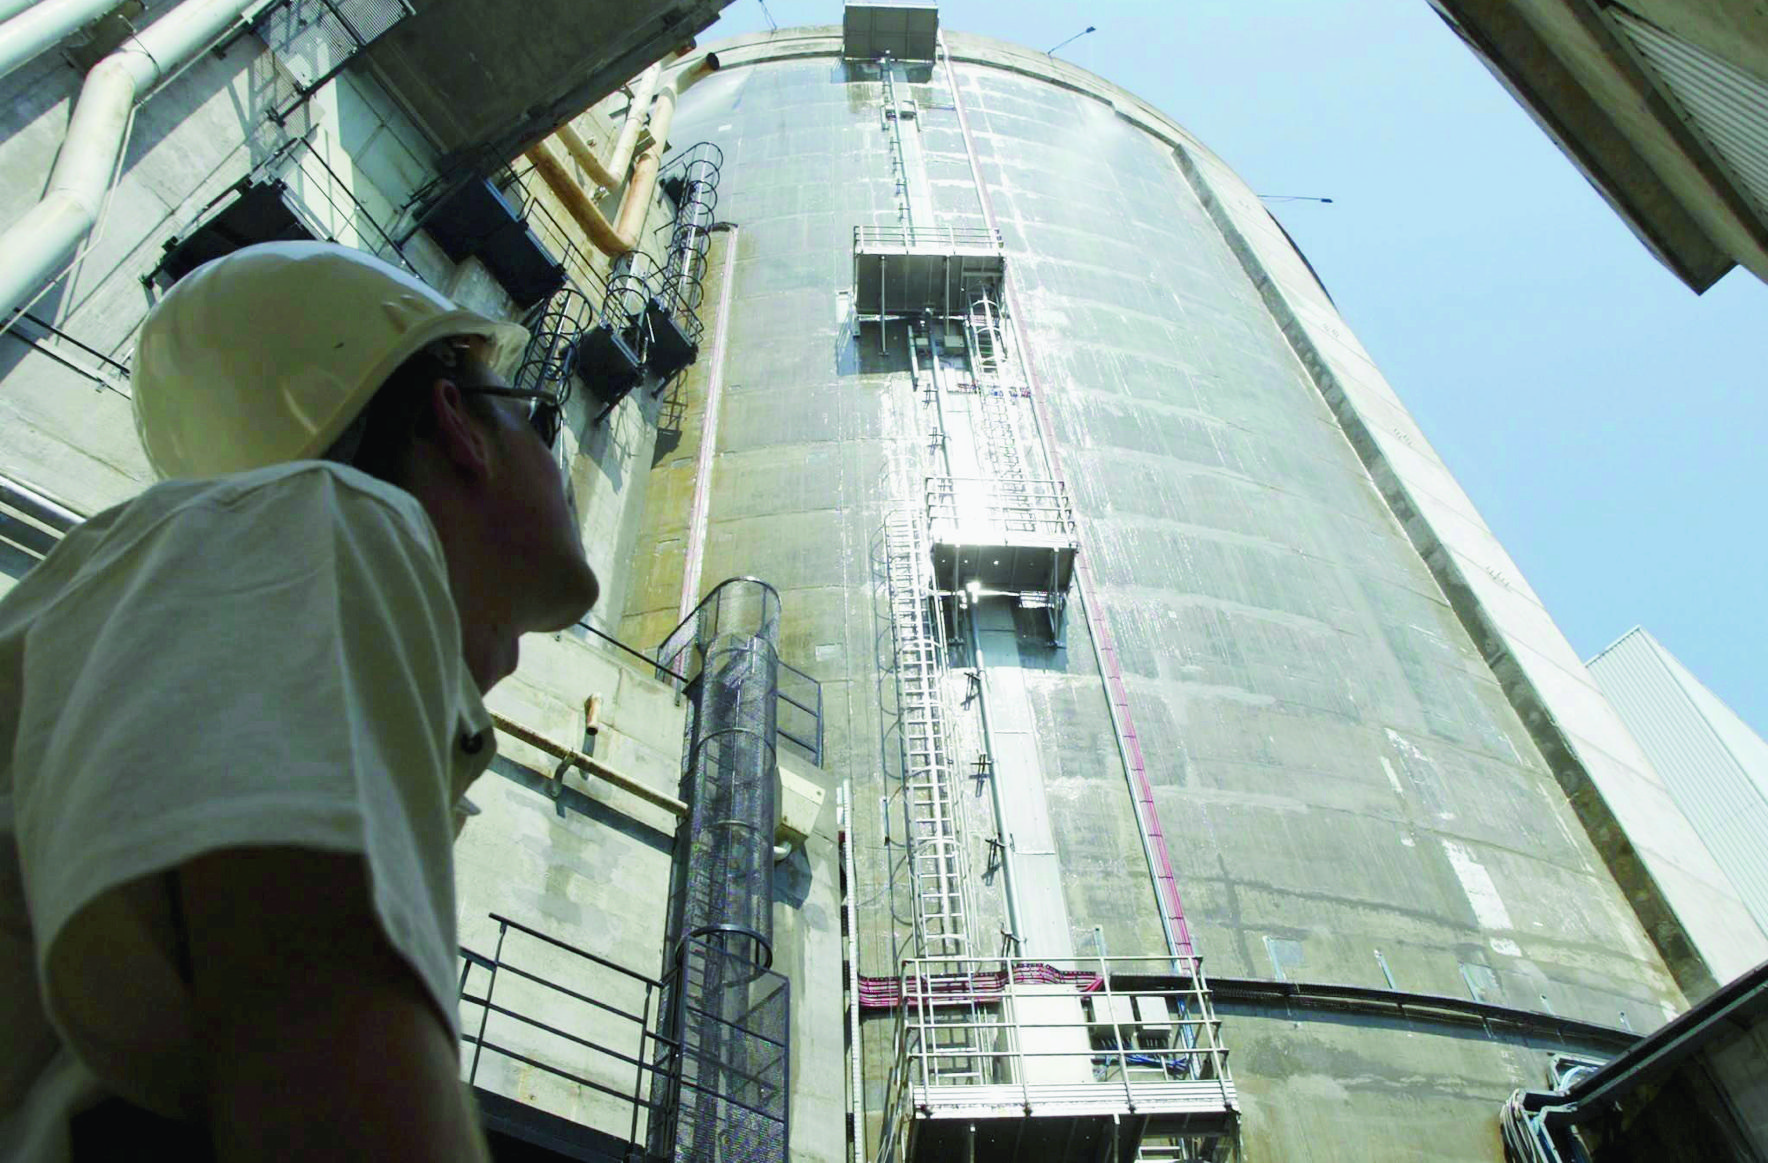 A man looks at the reactor tower that is being sprayed with cold water at the nuclear plant of Fessenheim, eastern France, Monday, 04 August 2003. The measure was taken in order to keep the temperatures inside the building at a normal level despite the heat wave sweeping the country. The initiative is part of a series of test of cooling techniques going on since Friday, but officials at the plant are unable to say whether it works. (KEYSTONE/EPA/SIPA/CHRISTIAN HARTMANN) FRANCE NUCLEAR WEATHER